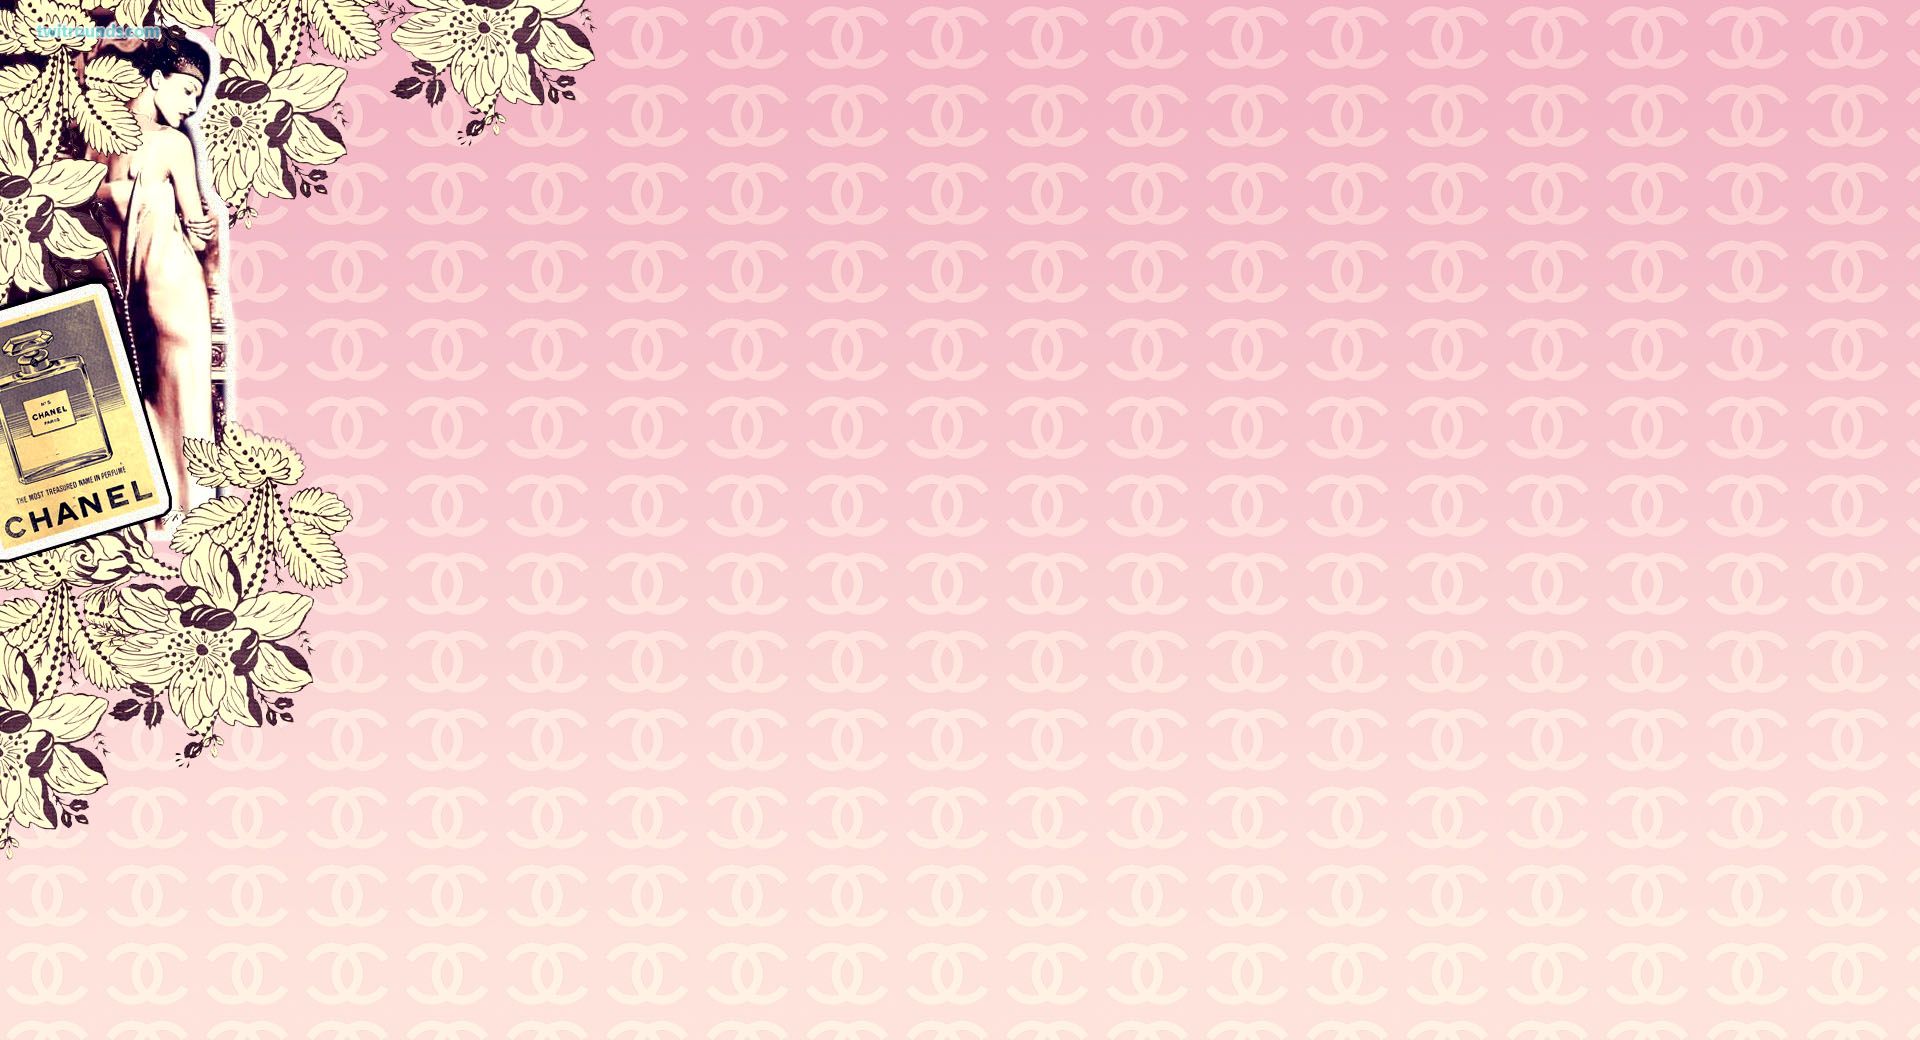 Coco Chanel Wallpapers > - Coco Chanel Pink Background , HD Wallpaper & Backgrounds